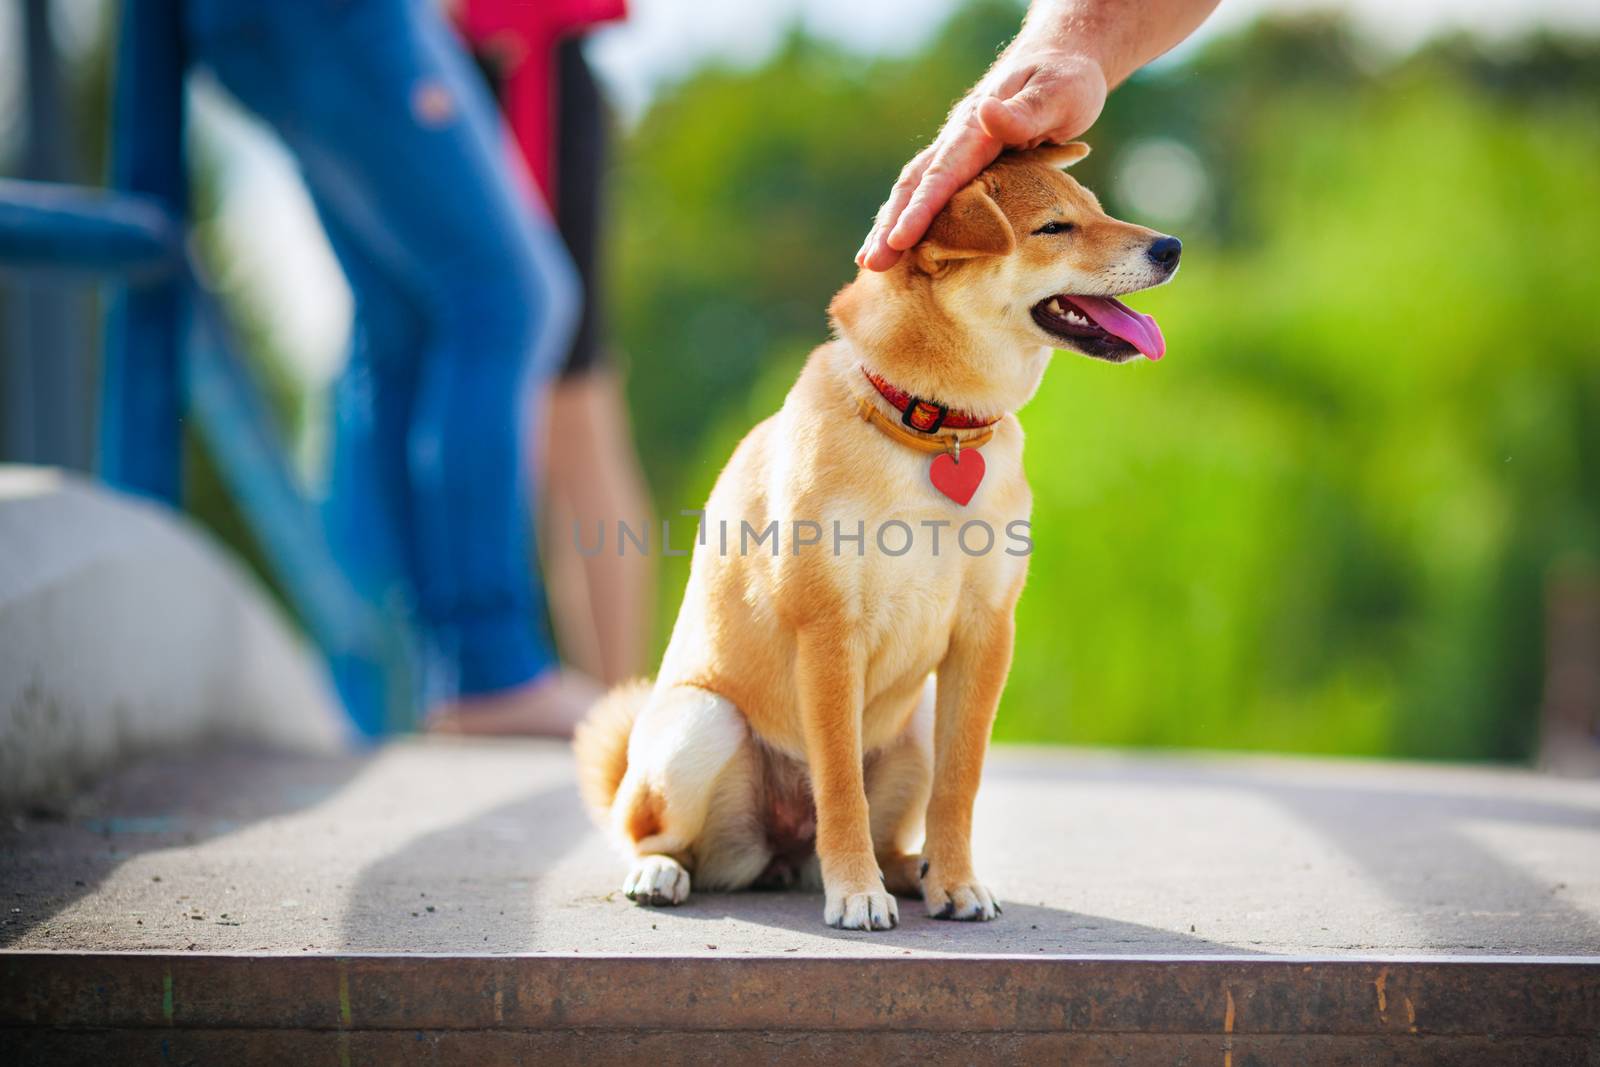 Shiba Inu puppy in the park. A hand is petting the top of his head.
